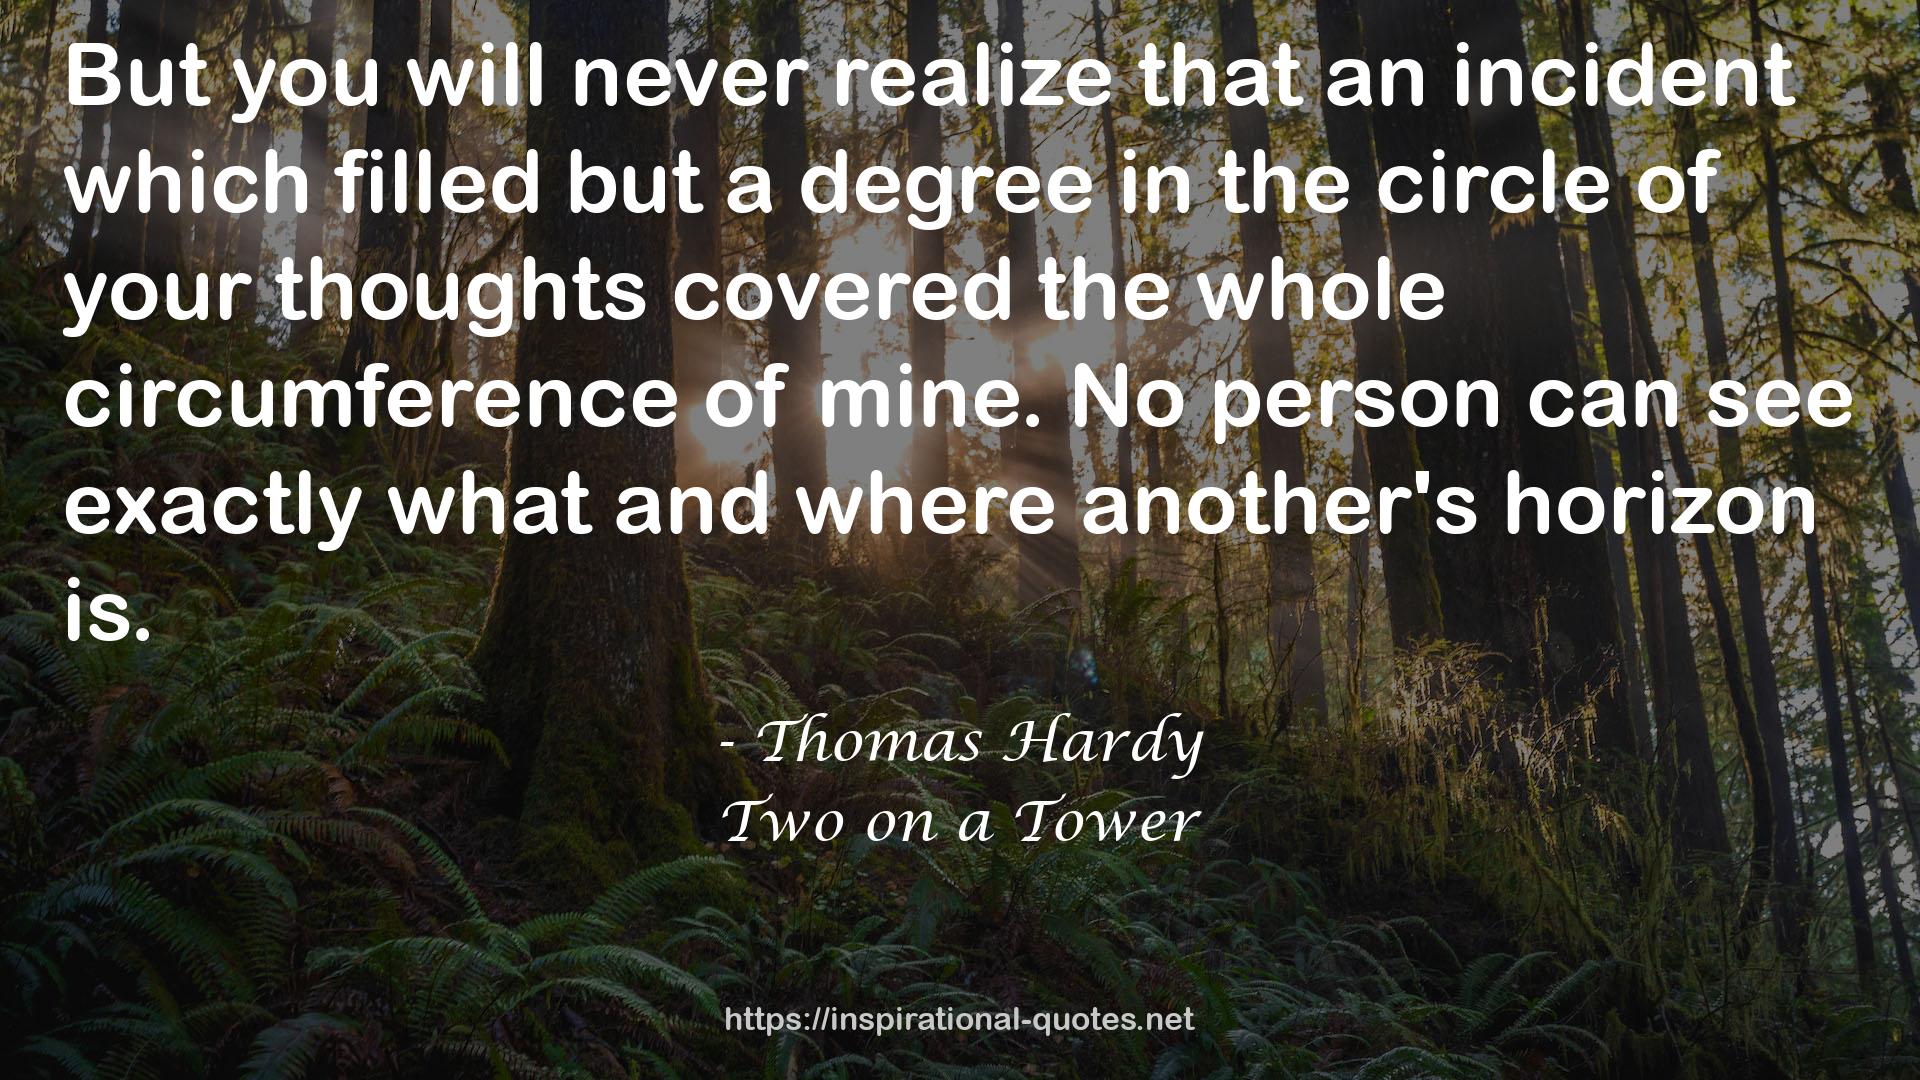 Two on a Tower QUOTES